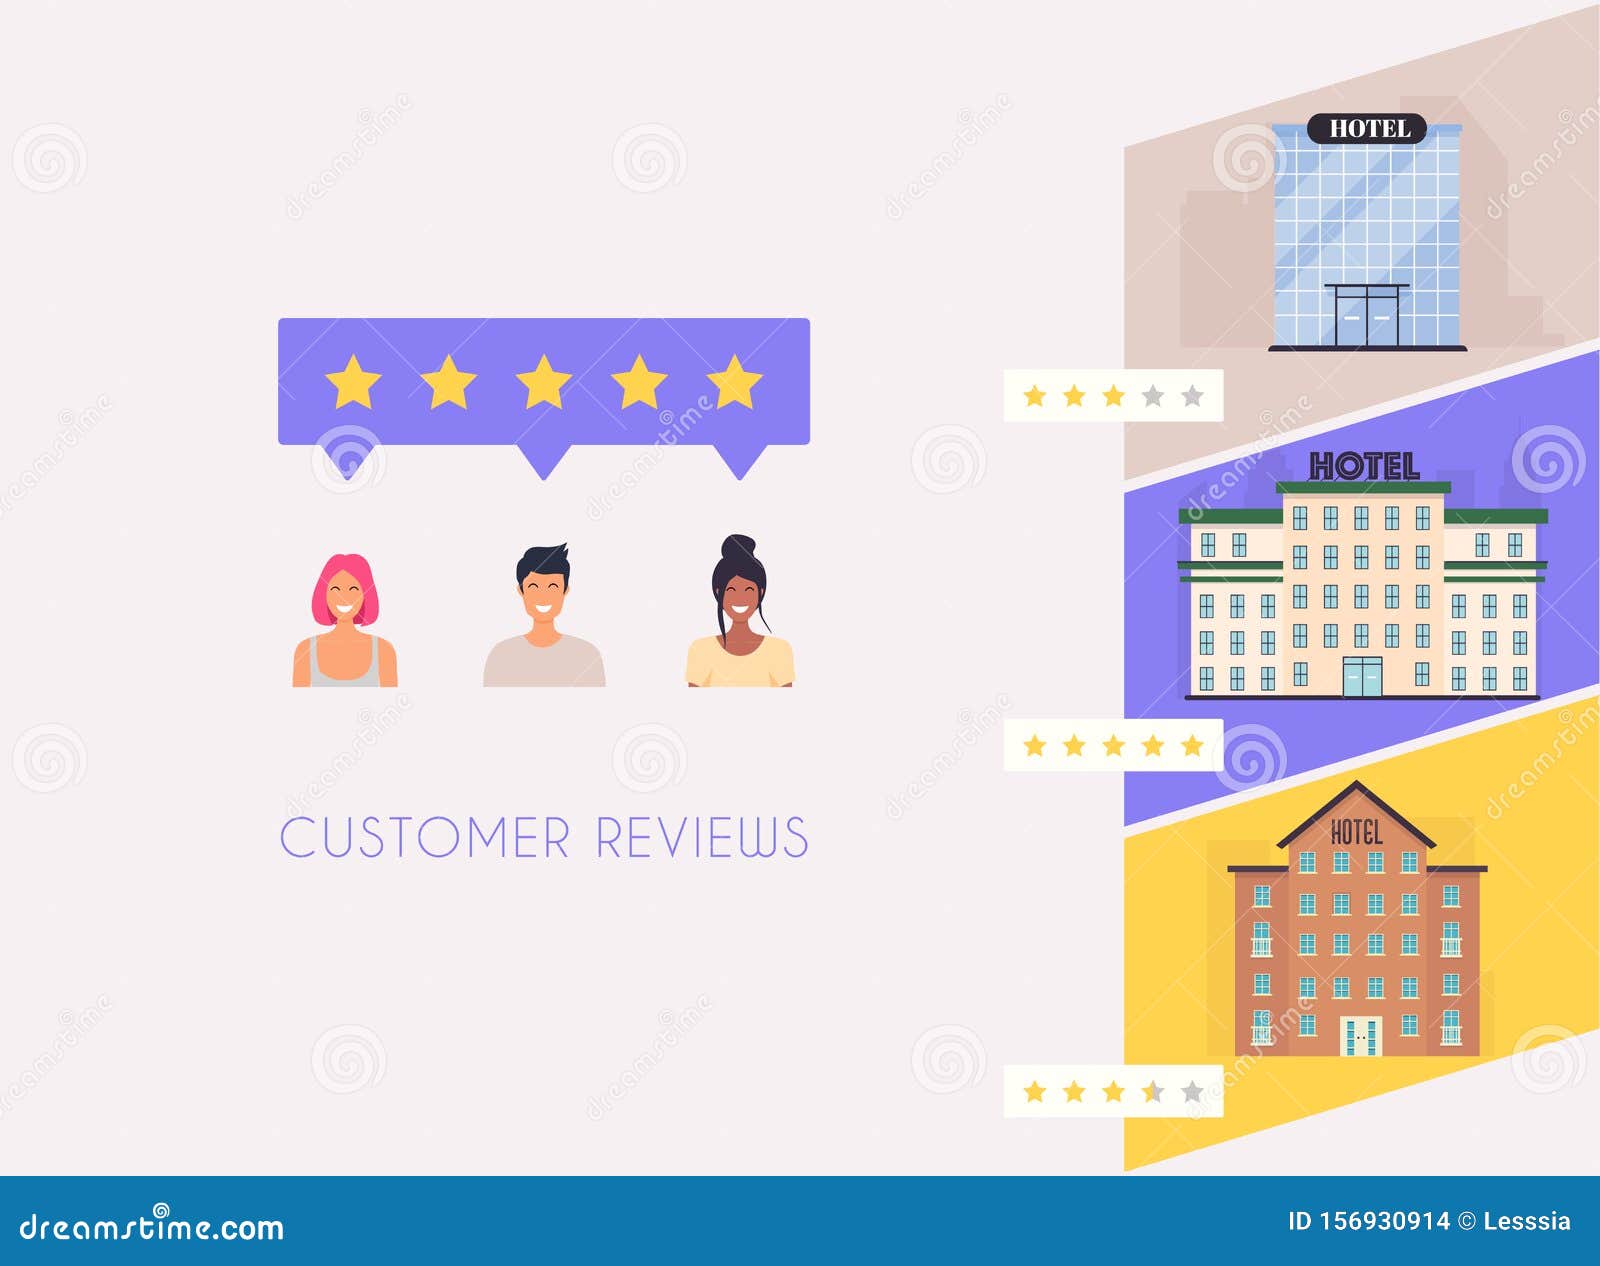 customer get reviews about hotels. concept of feedback, testimonials messages and notifications. rating on customer service